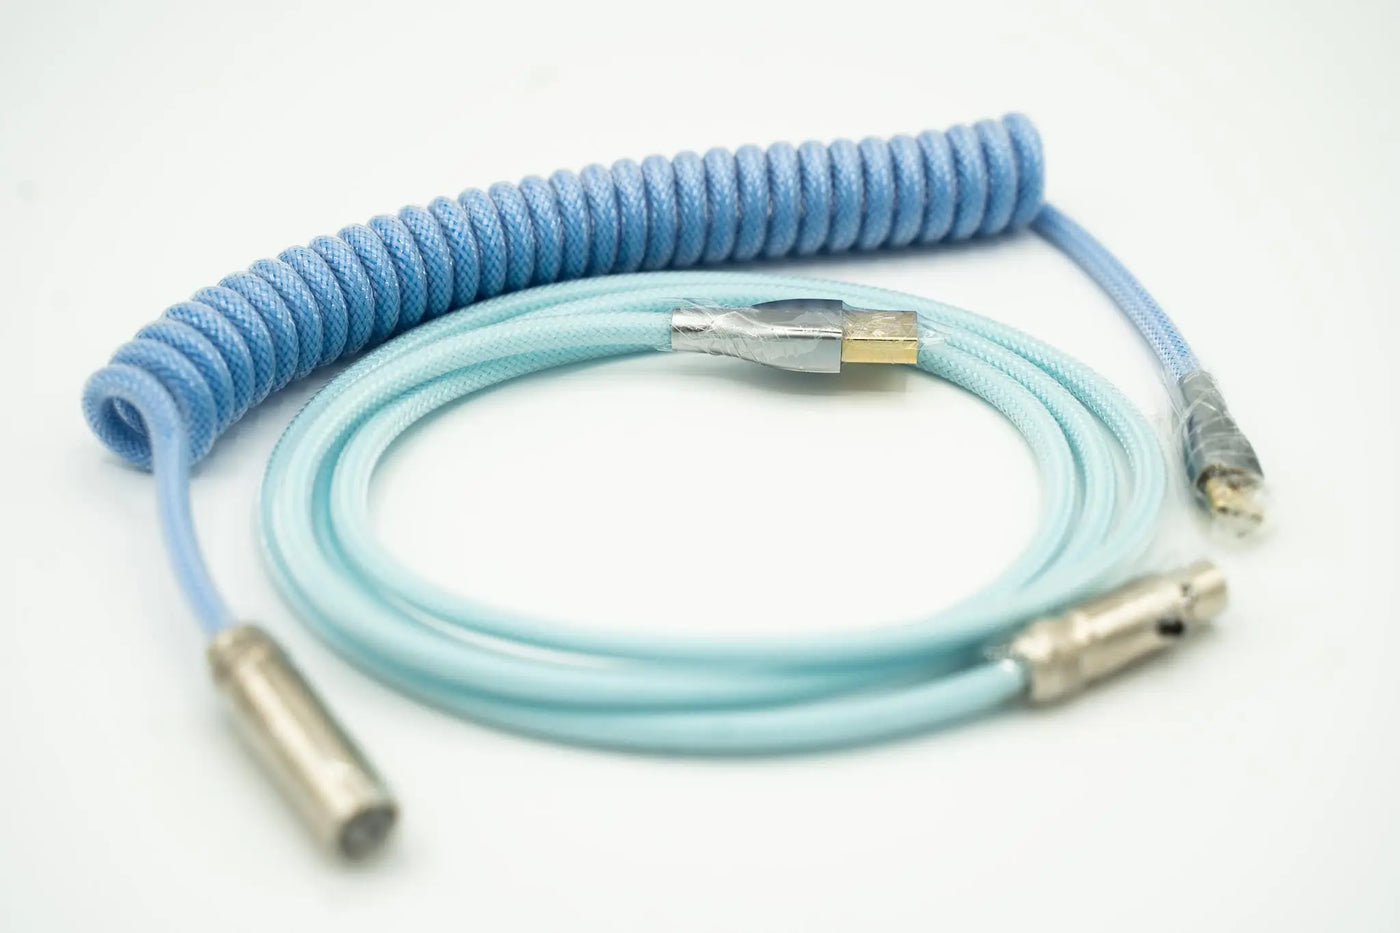 Blue and Cyan Custom Coiled Type C USB Cable for Keyboard Vyral